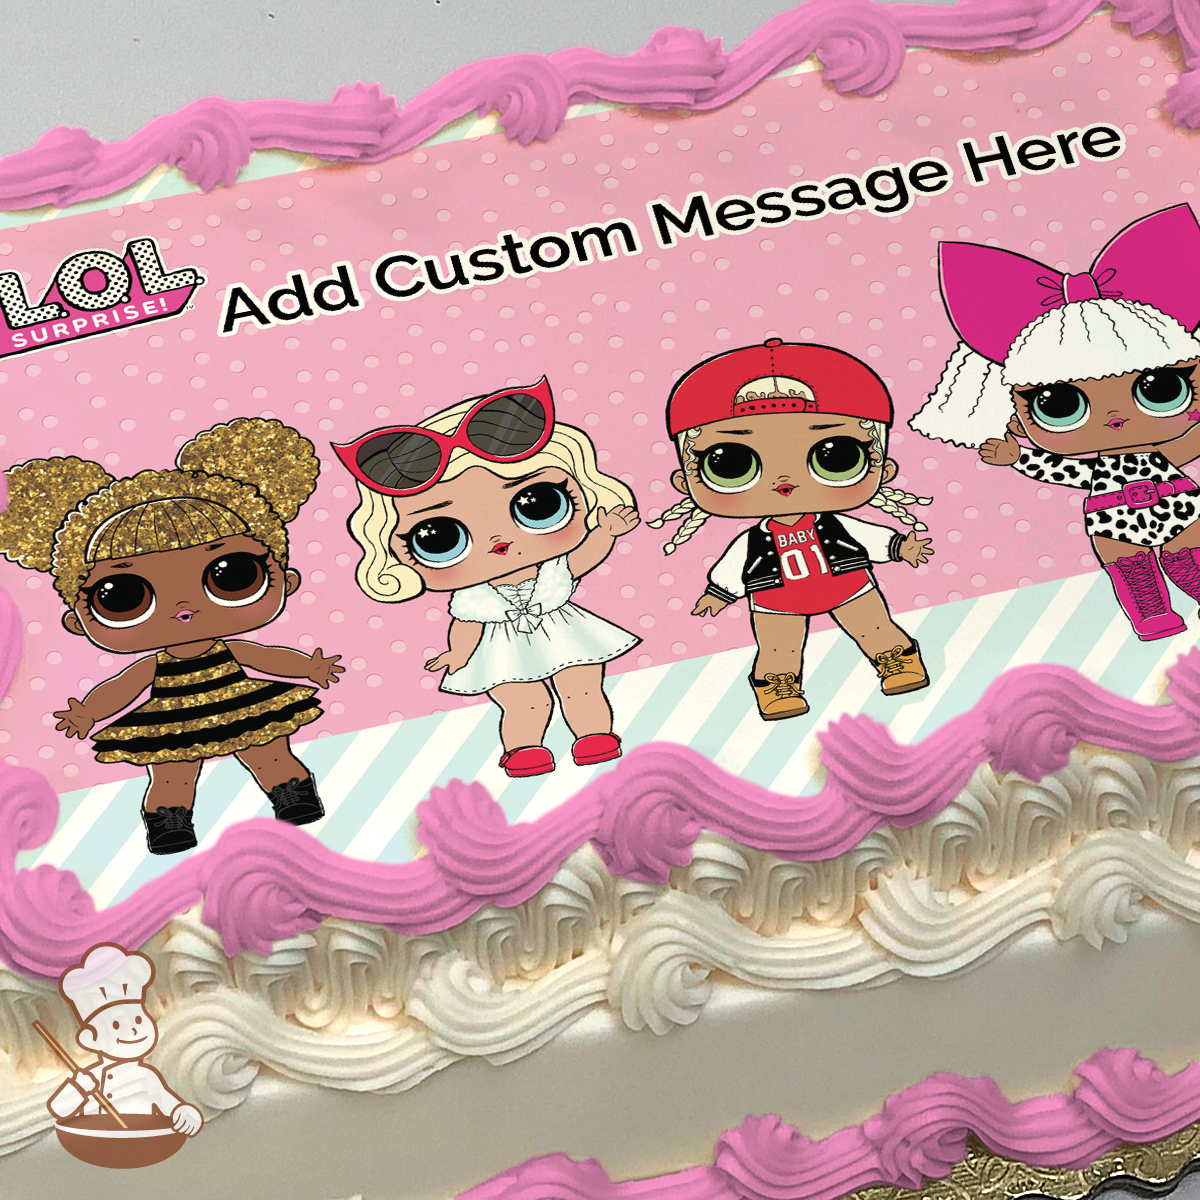 LOL Surprise Dolls printed on extra cake layer and decorated on rectangle sheet cake.